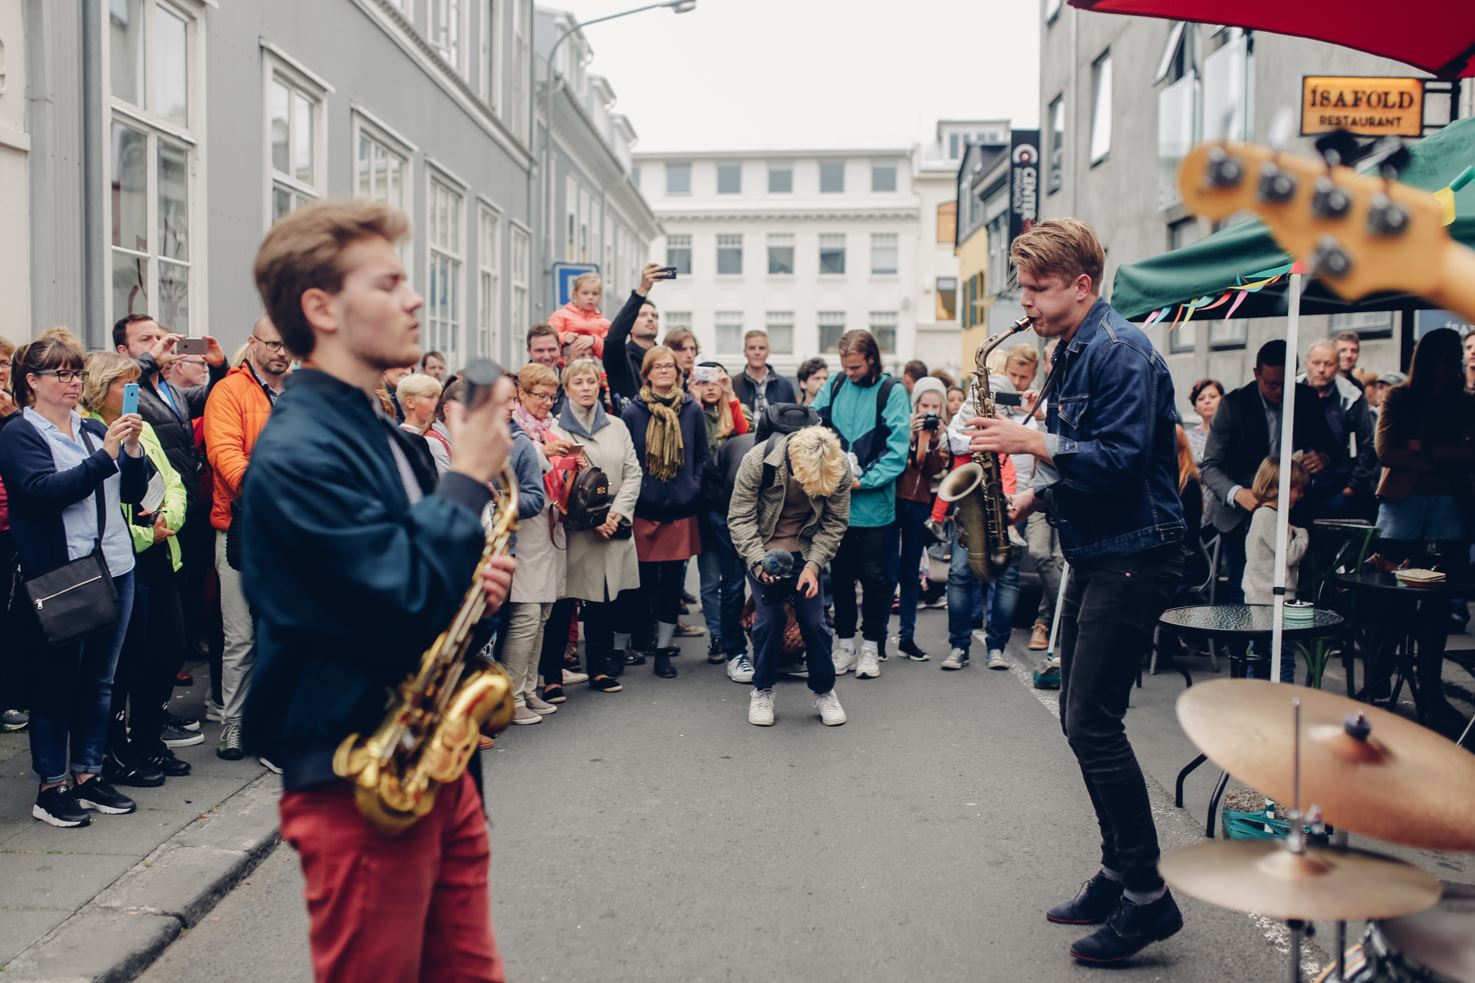 A jazz band playing on a street at Reykjavik, Iceland